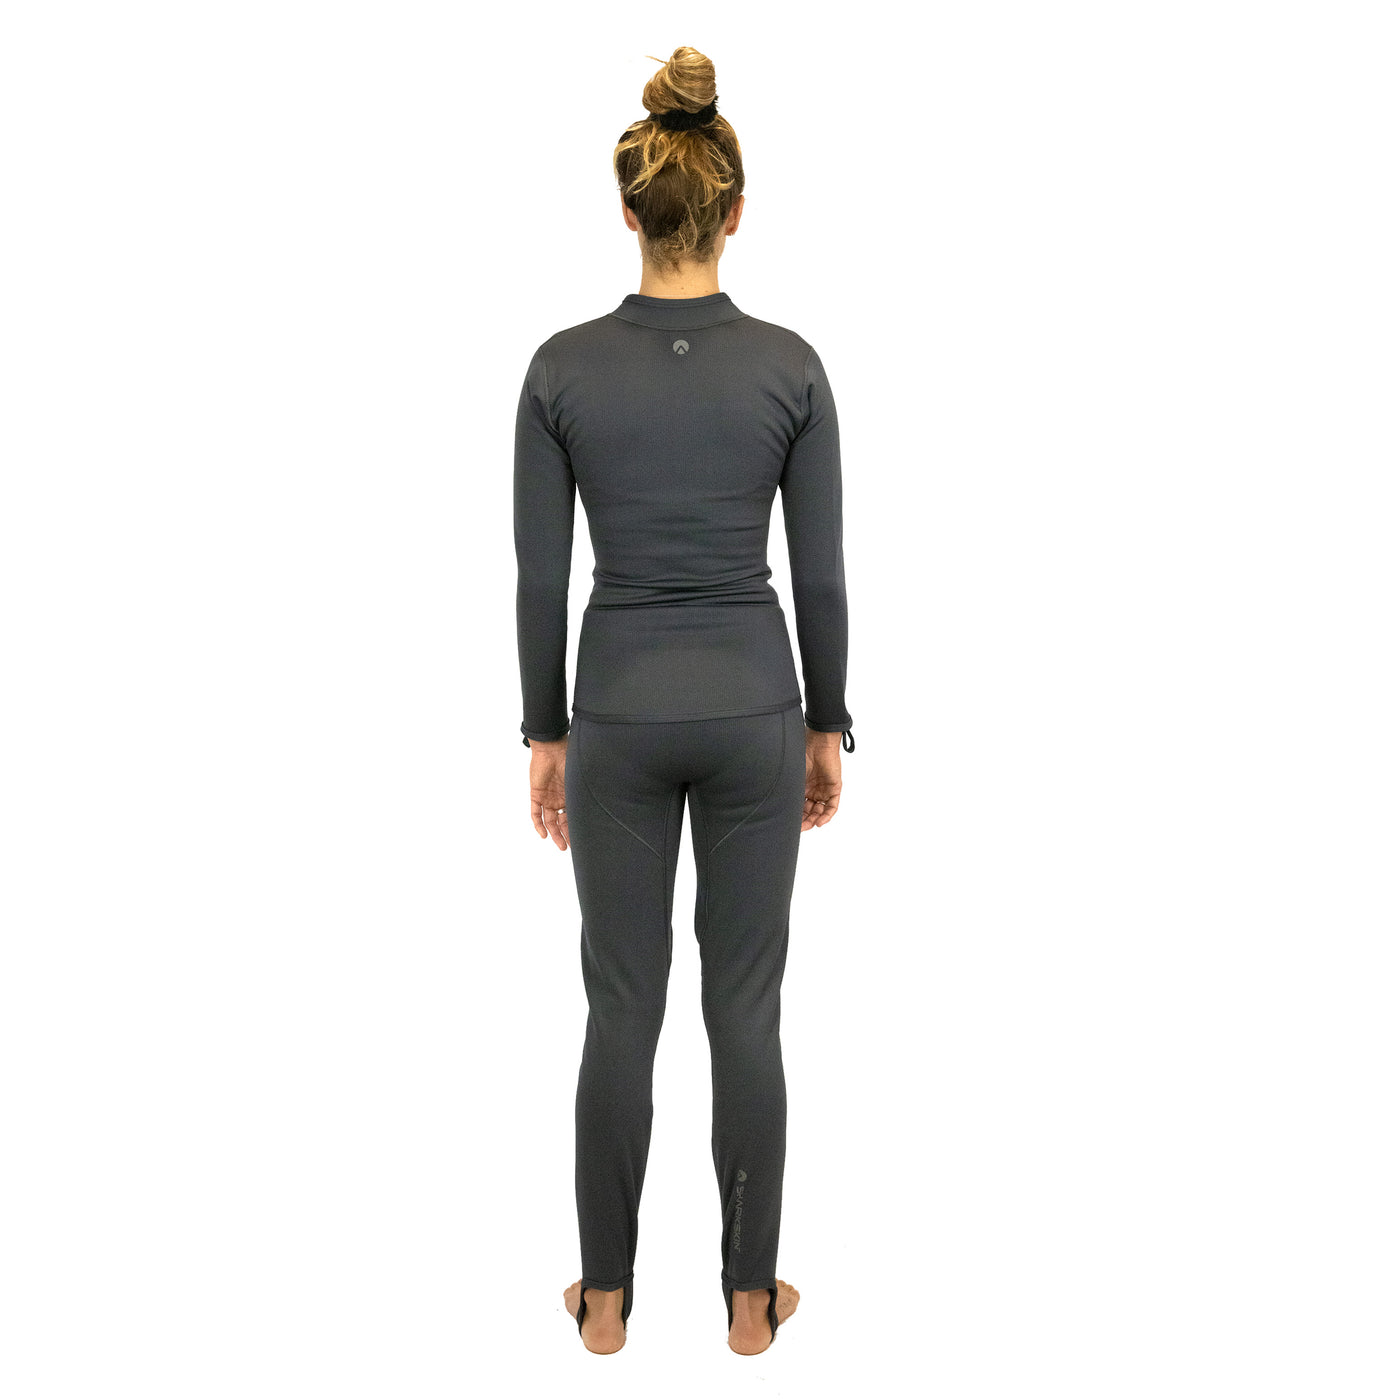 T2 CHILLPROOF TOP AND BOTTOMS PACKAGE - WOMENS